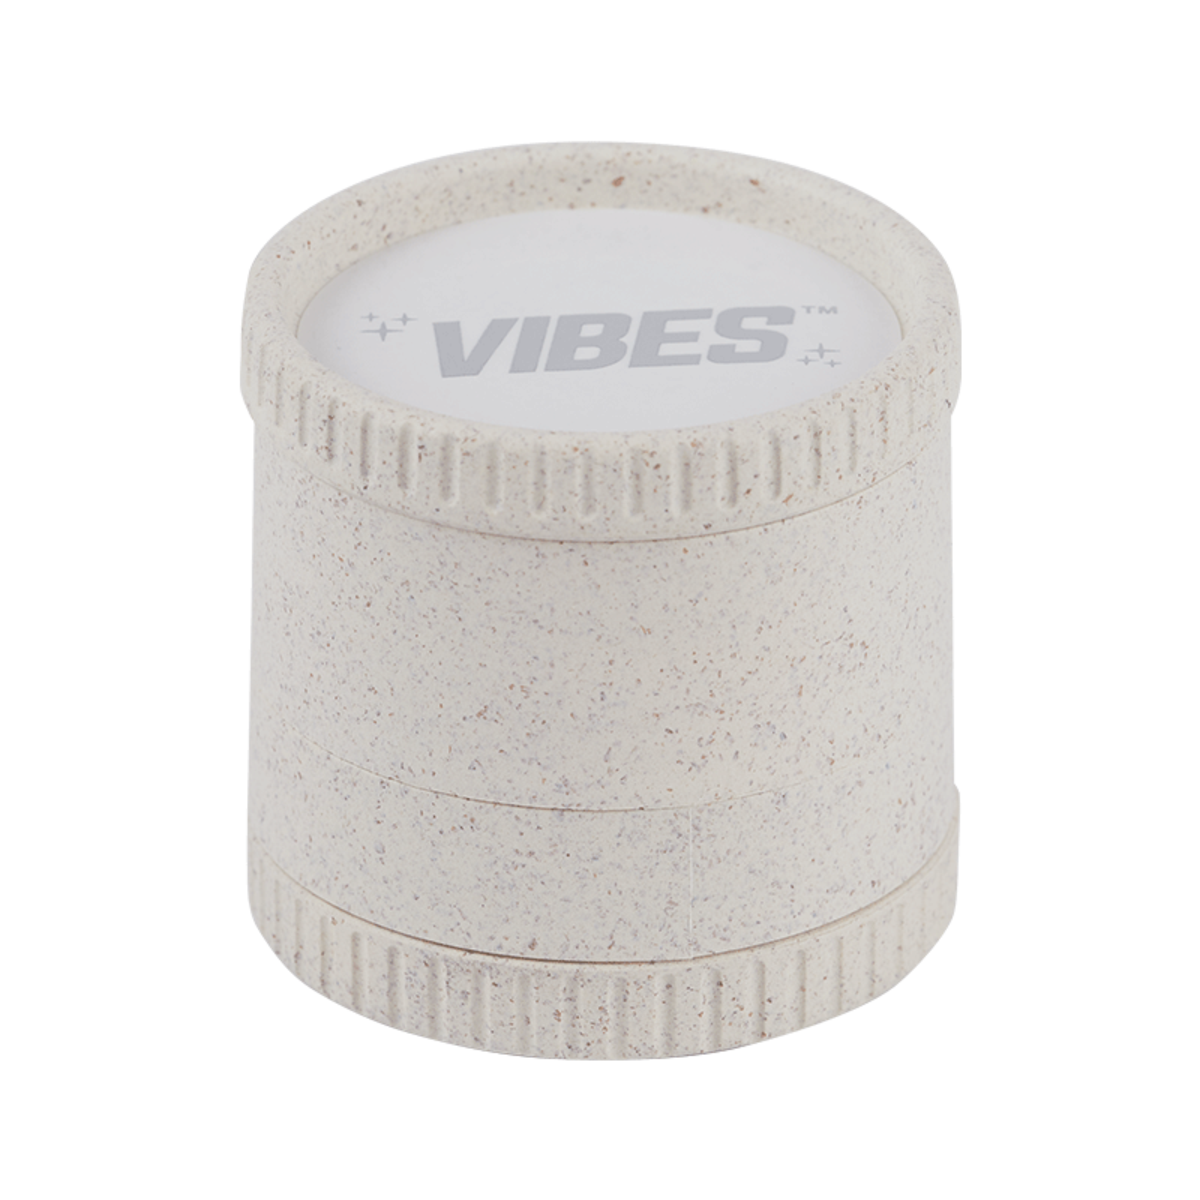 Vibes X Santa Cruz Shredder 4-Piece Hemp Grinder White. The Vibes™ X Santa Cruz Shredder 4-Piece Hemp Grinder is a Biodegradable Grinder Made From 100% Natural Hemp. This Durable Grinder Sports a Patented-Tooth Design that Delivers a Remarkably Even and Fluffy Grind. MOST DIVERSE CBD CONCENTRATE COLLECTION ON THE WEB. Top Shelf CBD Hemp Flower. Dab, Vape, Smoke Accessories - Sauce Warehouse